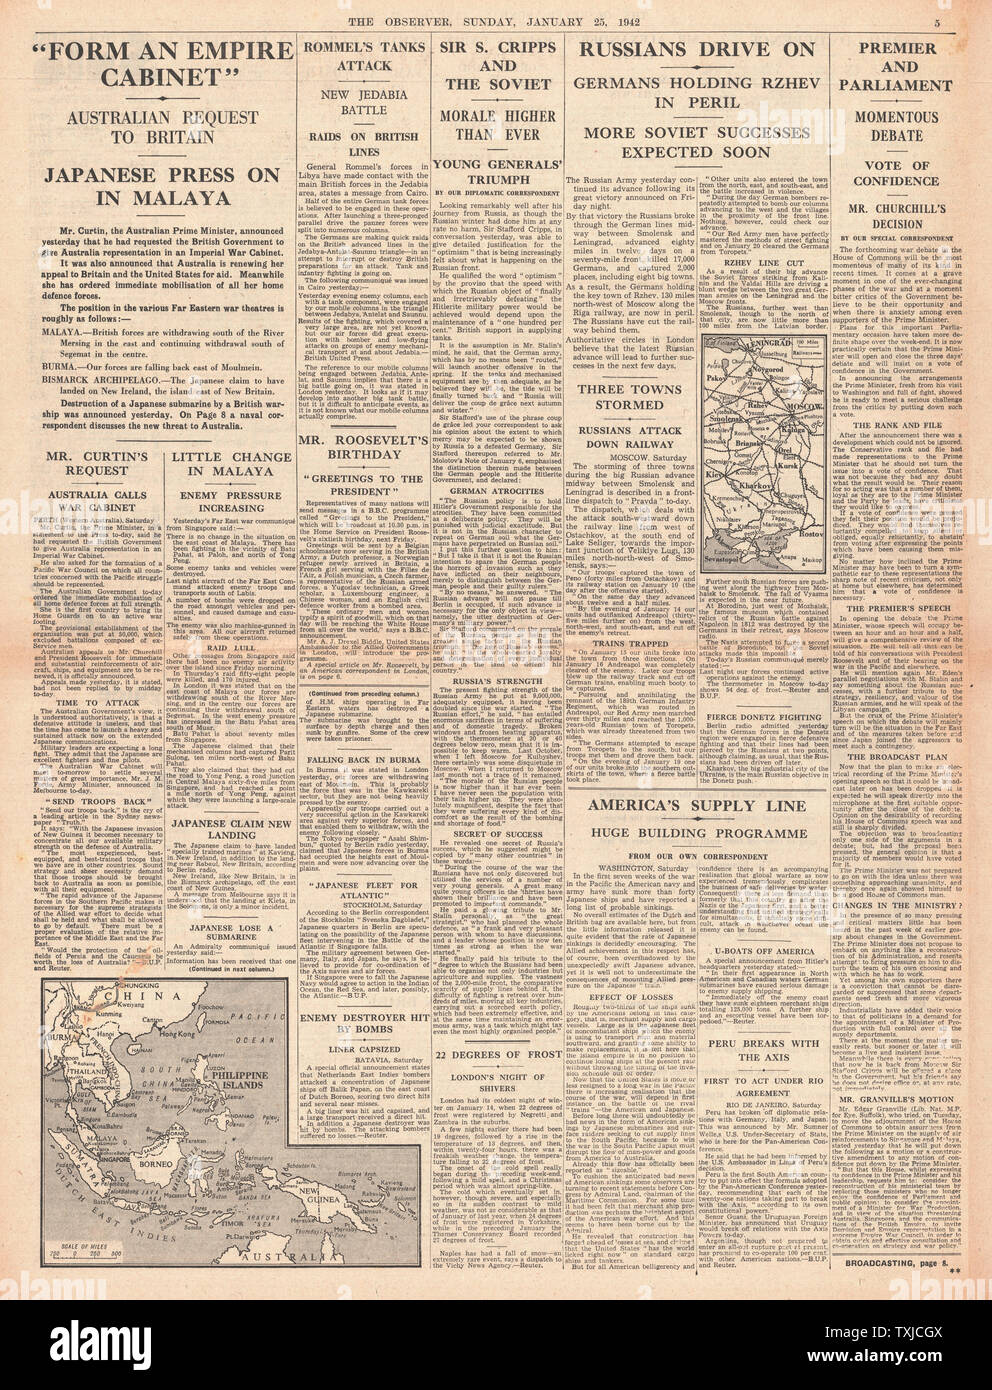 1942 page 5 The Observer Australian Prime Minister requests Imperial War Cabinet and Russian Army advance on German Forces Stock Photo